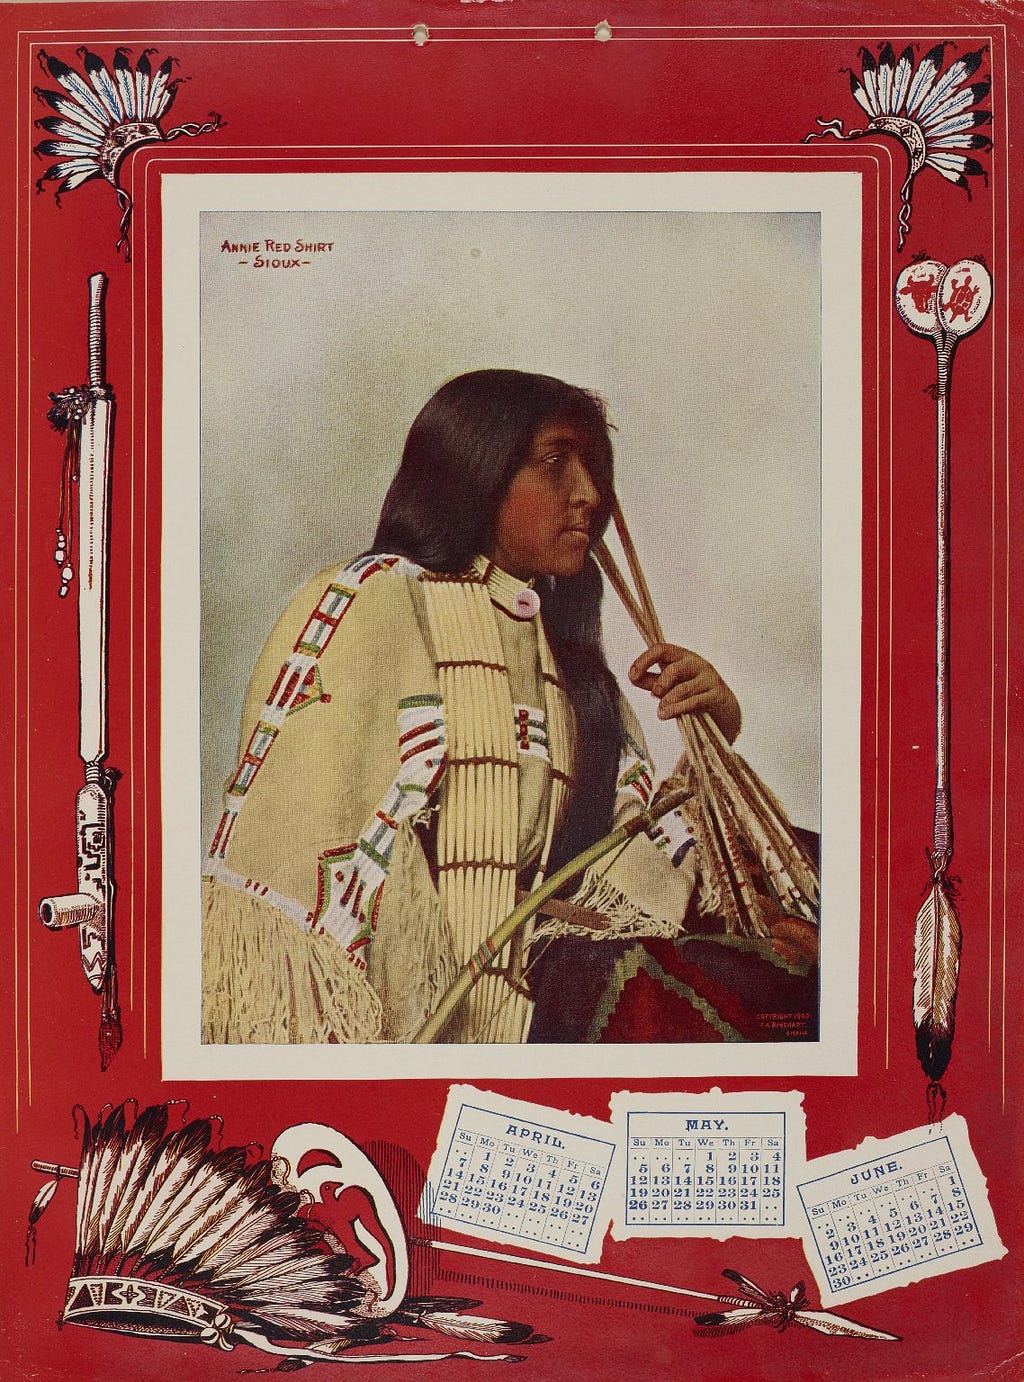 Calendar featuring Annie Red Shirt — Sioux, with illustrations of feathers, an arrow and head-dress.